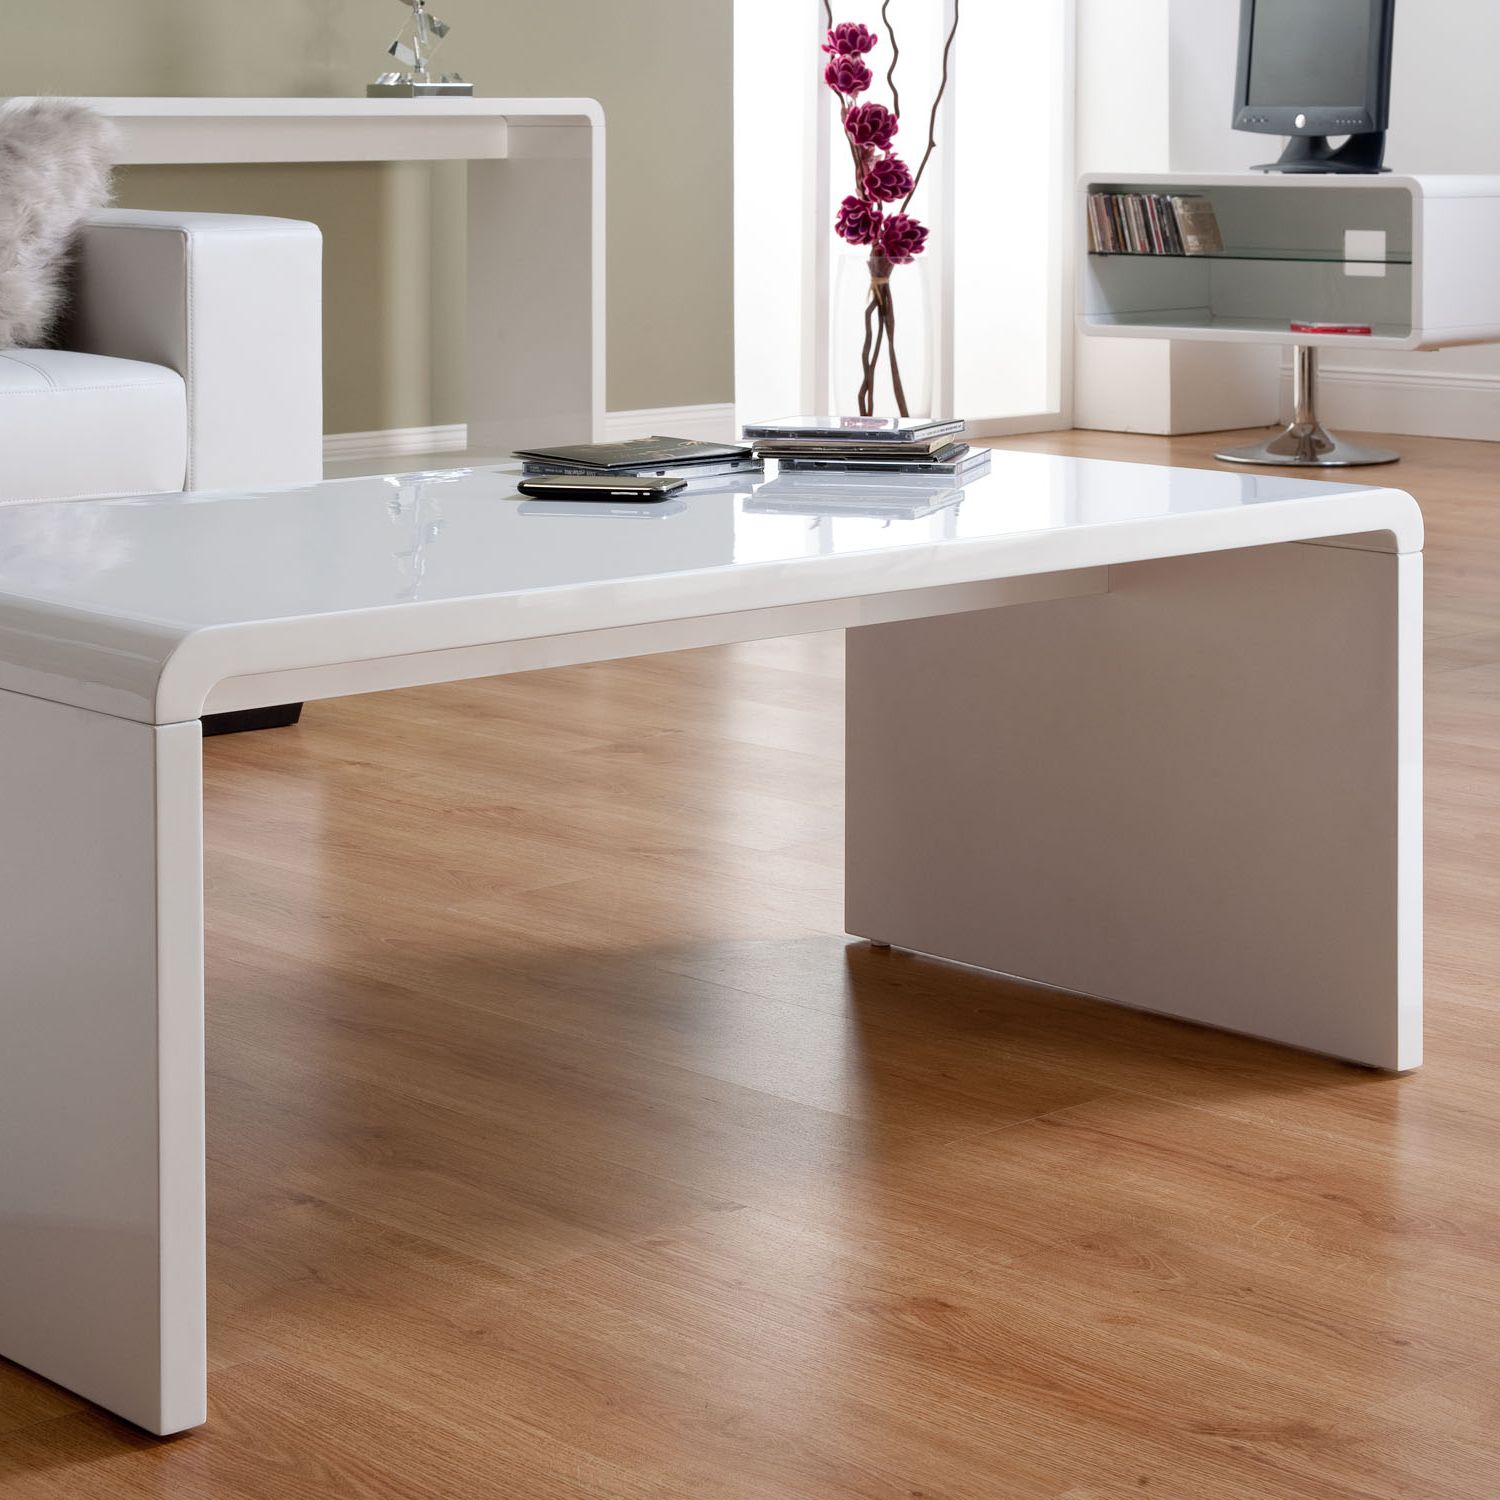 2020 Gloss White Steel Coffee Tables Throughout Toscana Gloss Coffee Table (Gallery 5 of 20)